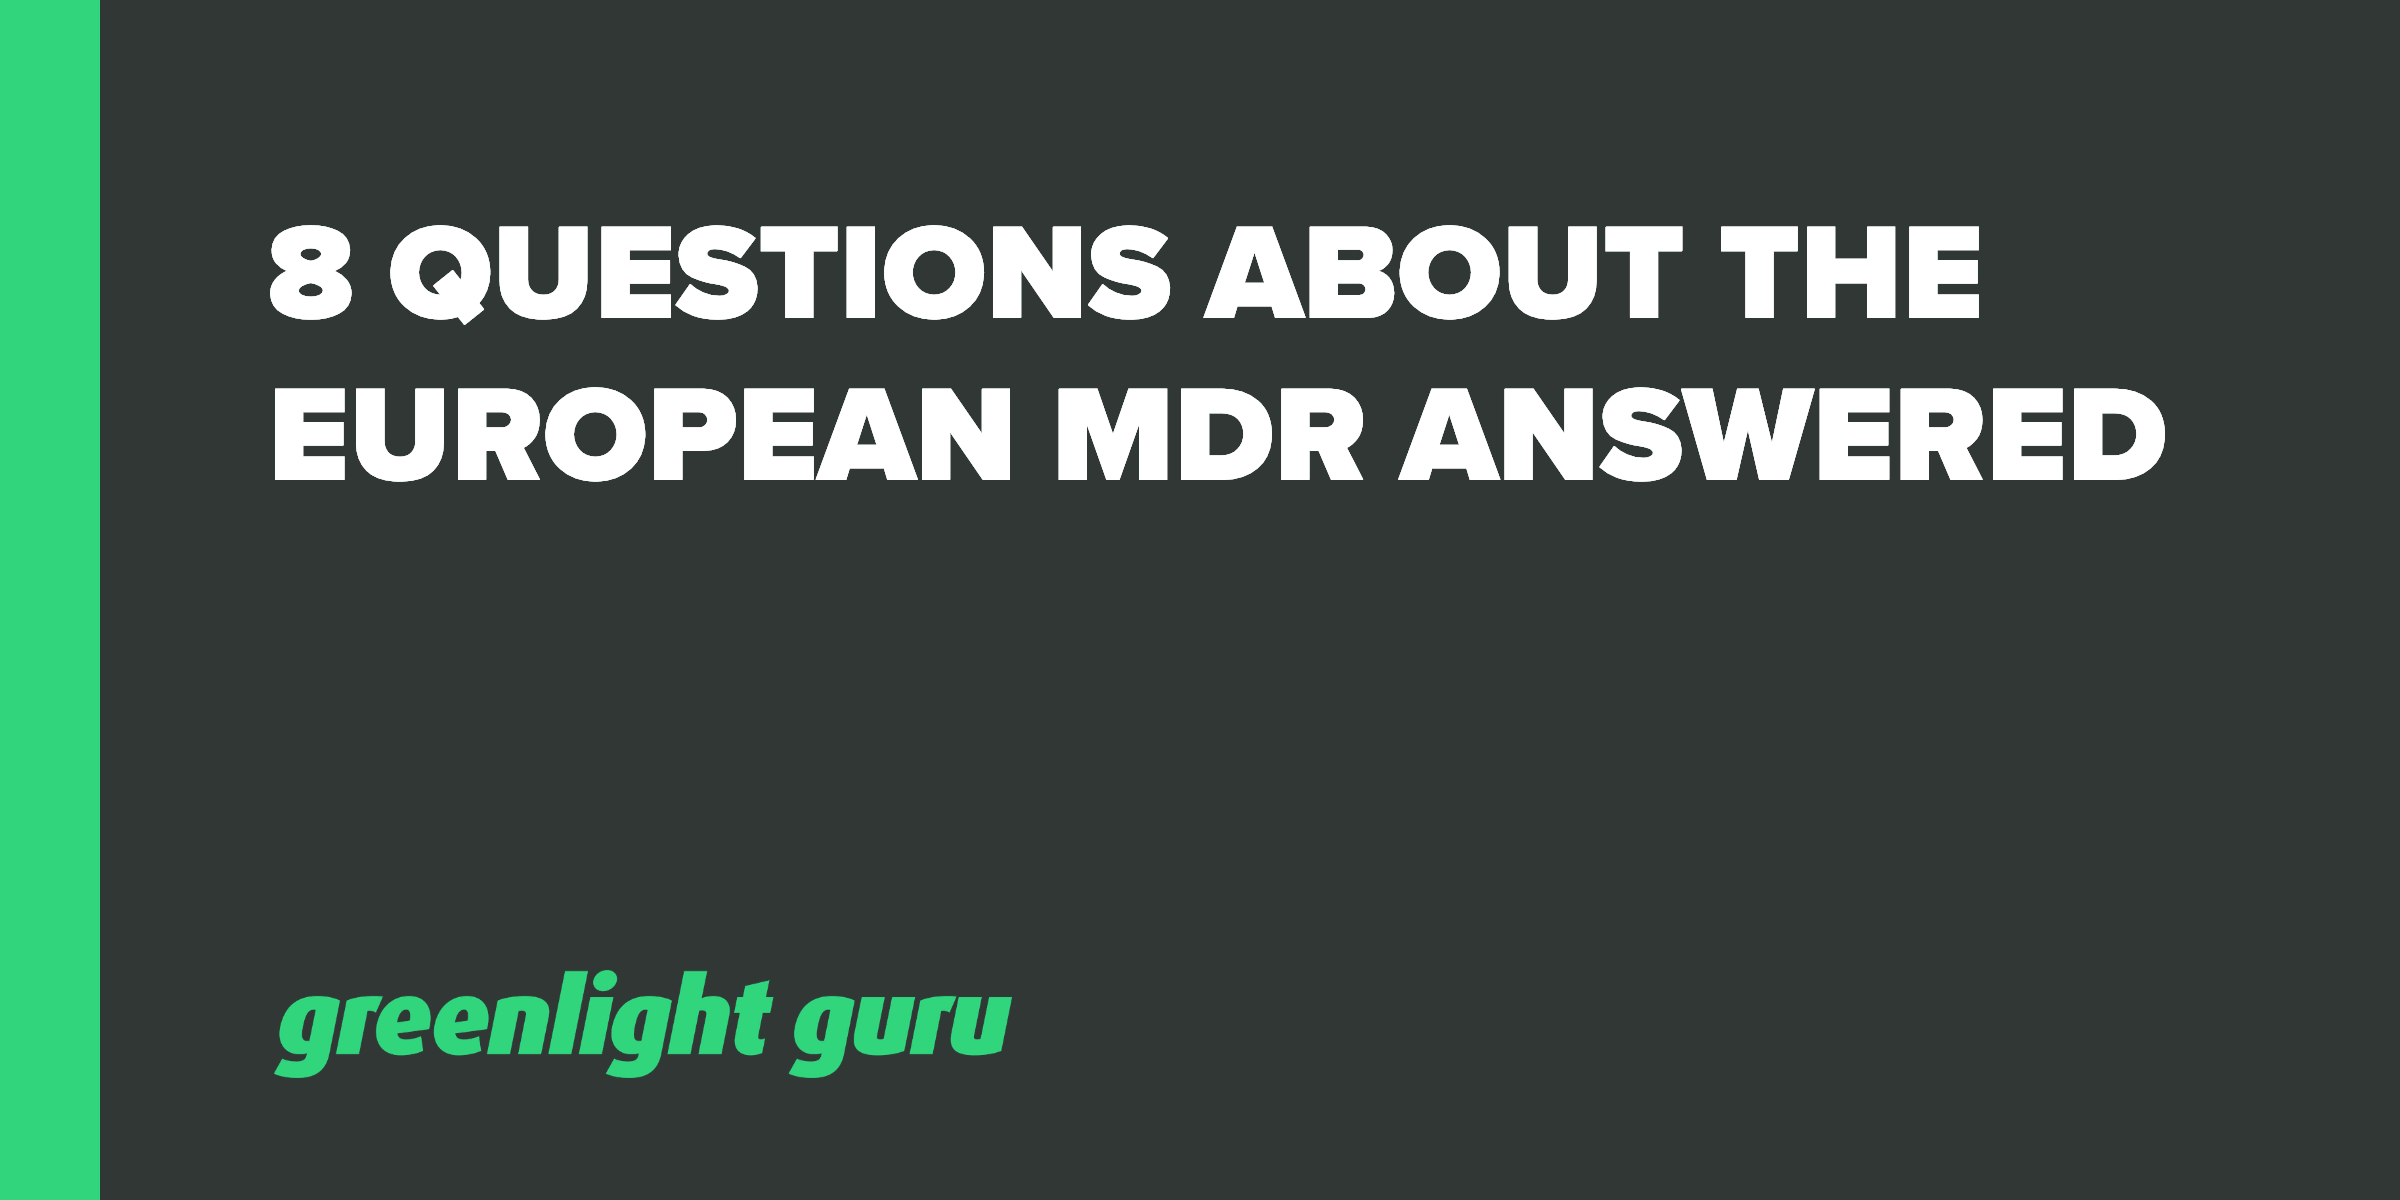 8 Questions about the European MDR Answered